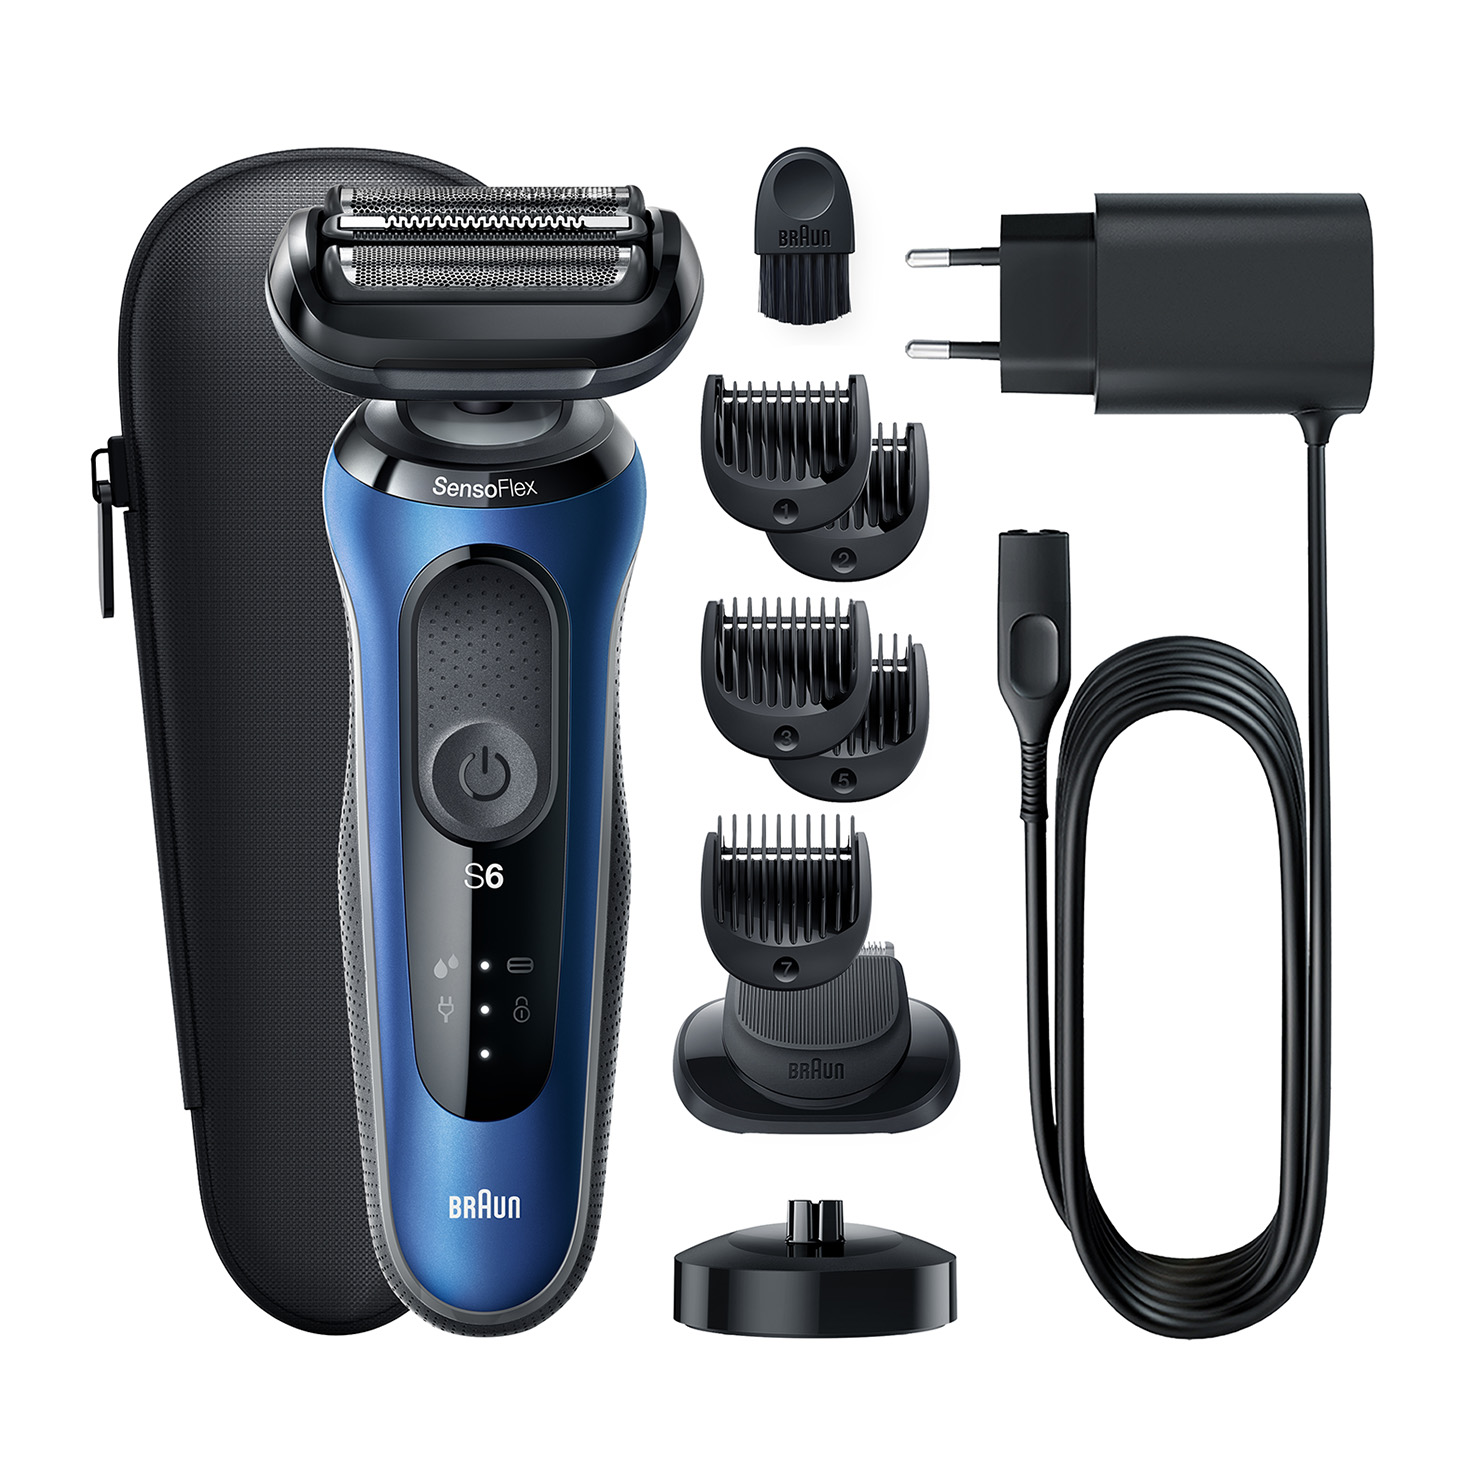 Series 6 61-B4500cs Wet & Dry shaver with charging stand and 1 